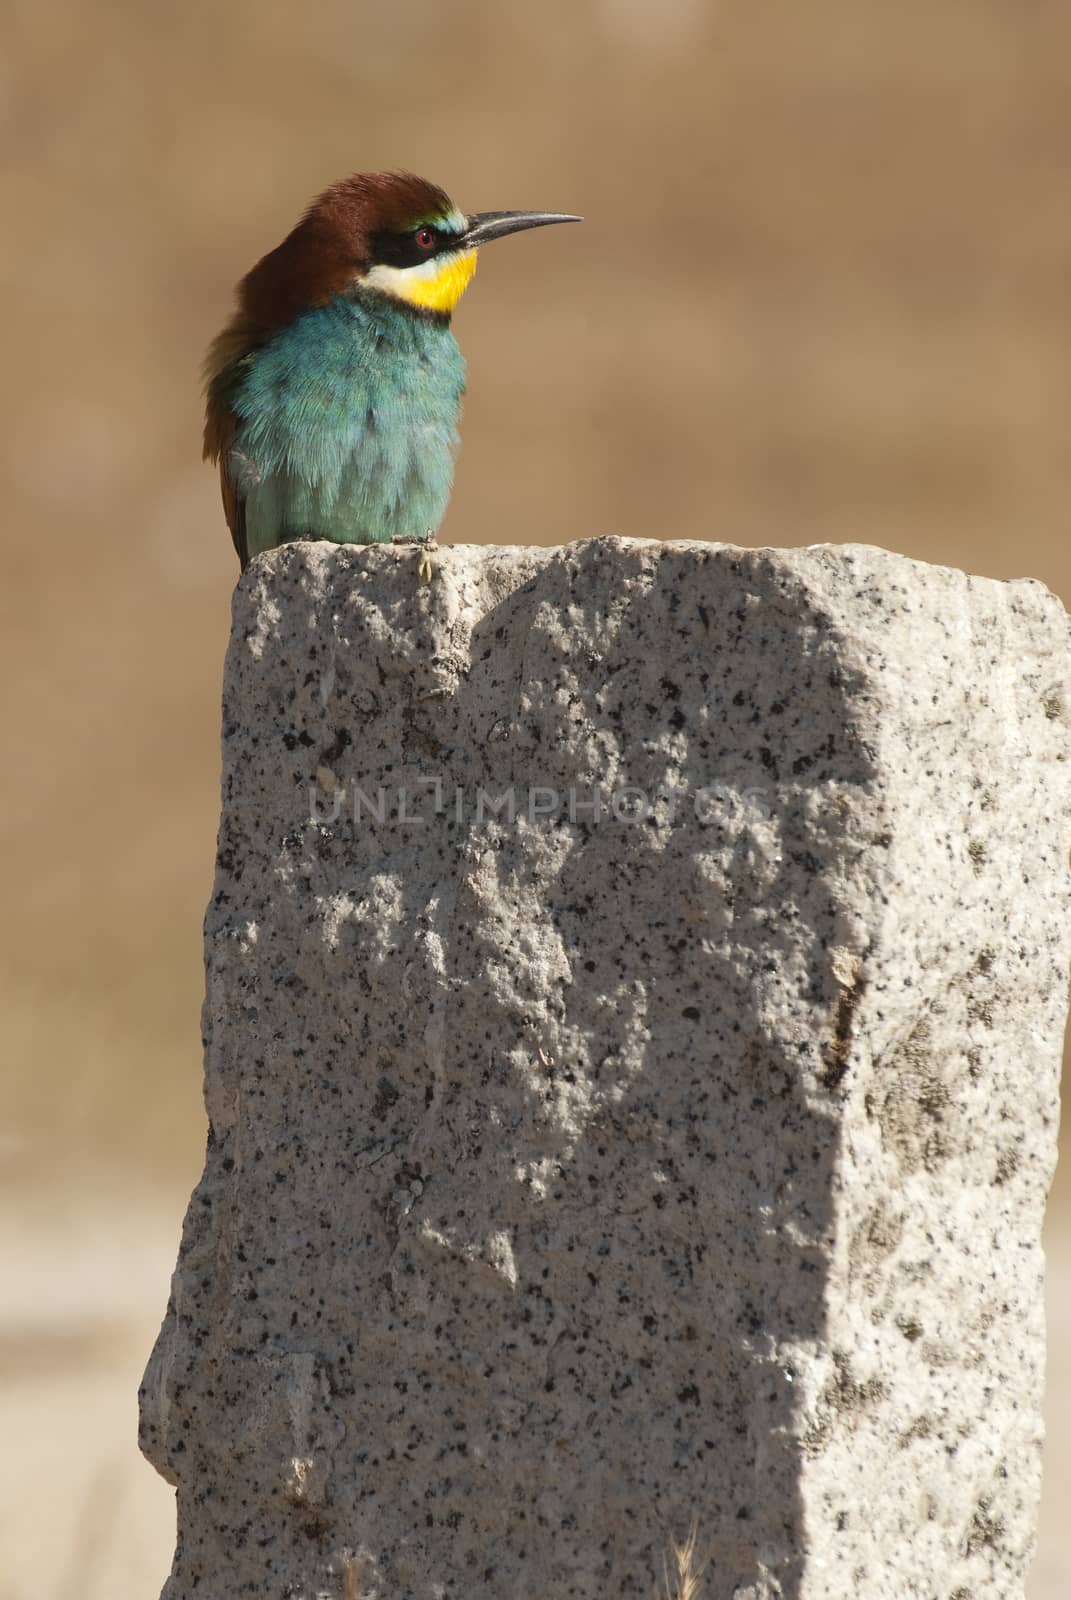 European bee-eater (Merops apiaster), perched on a rock  by jalonsohu@gmail.com